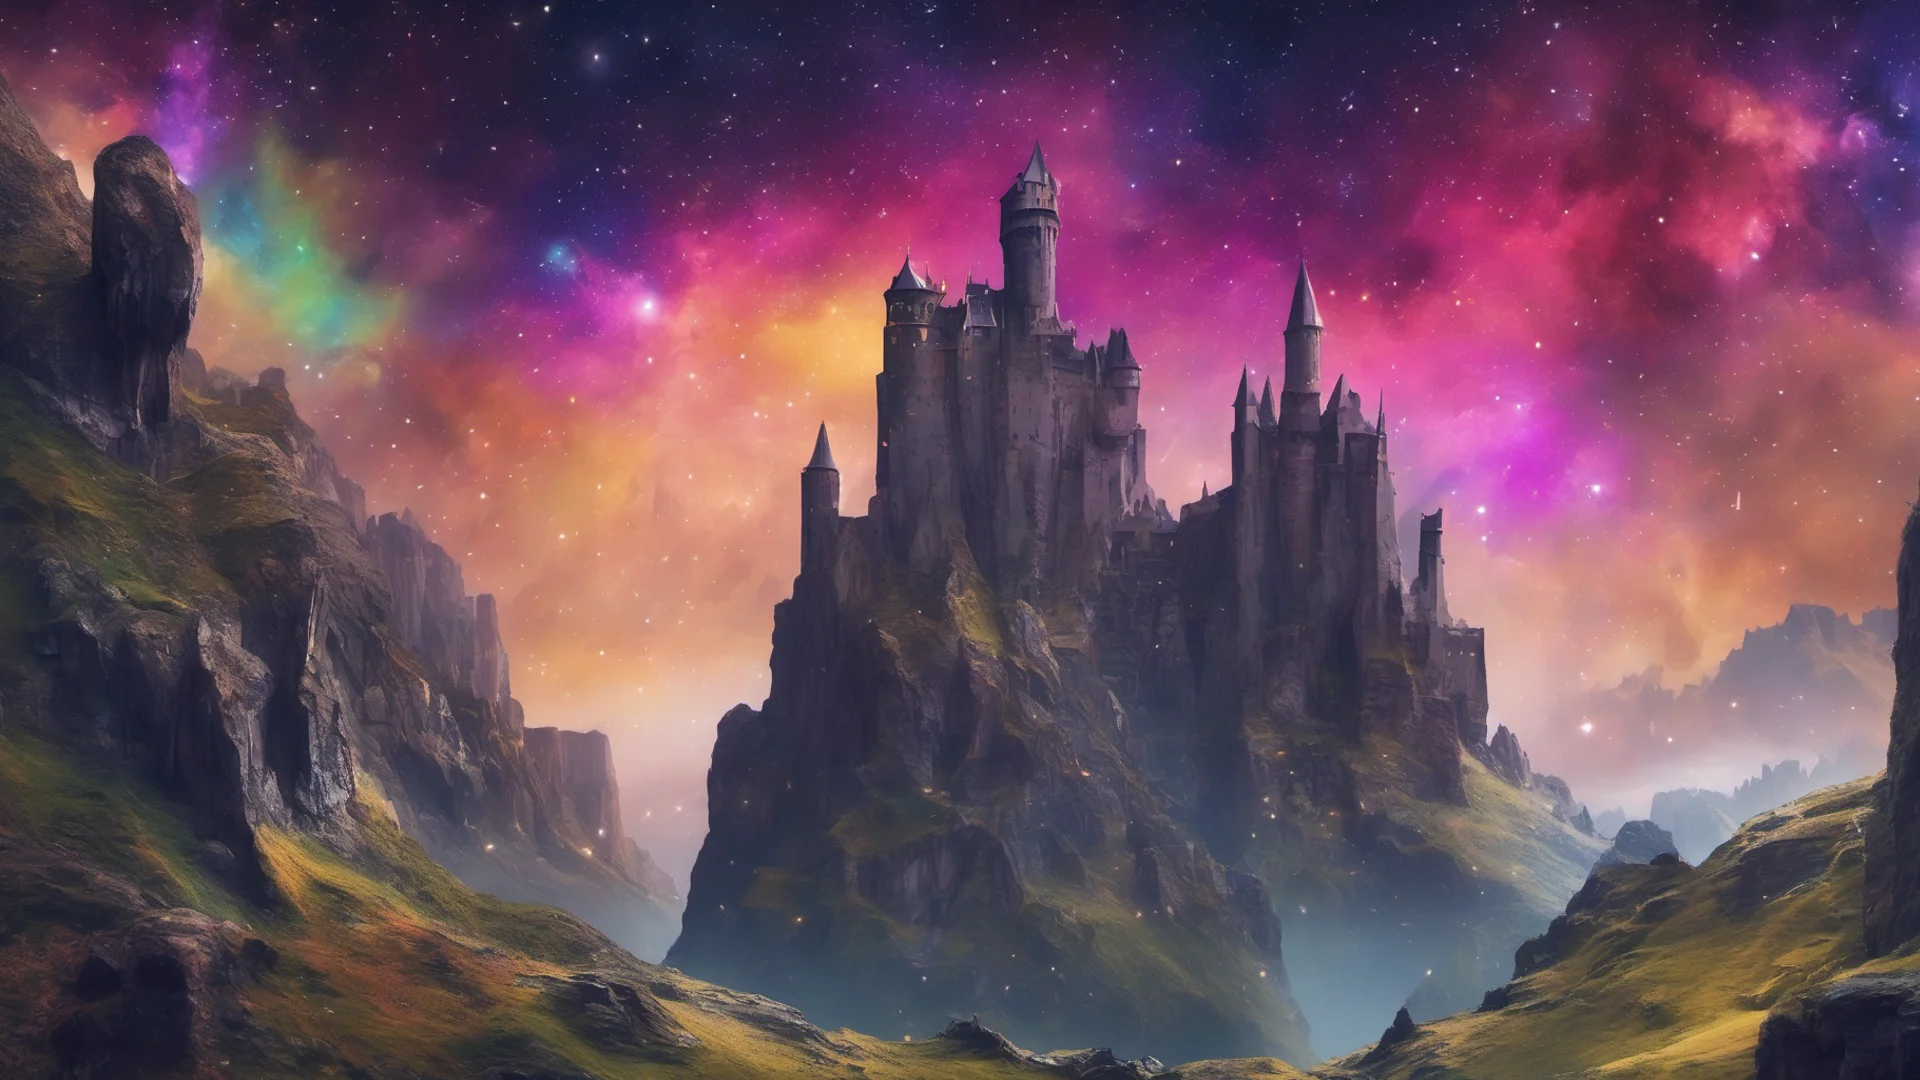 castle unreal landscape amazing starry colorful galaxies in sky steep cliffs overhangs  wide